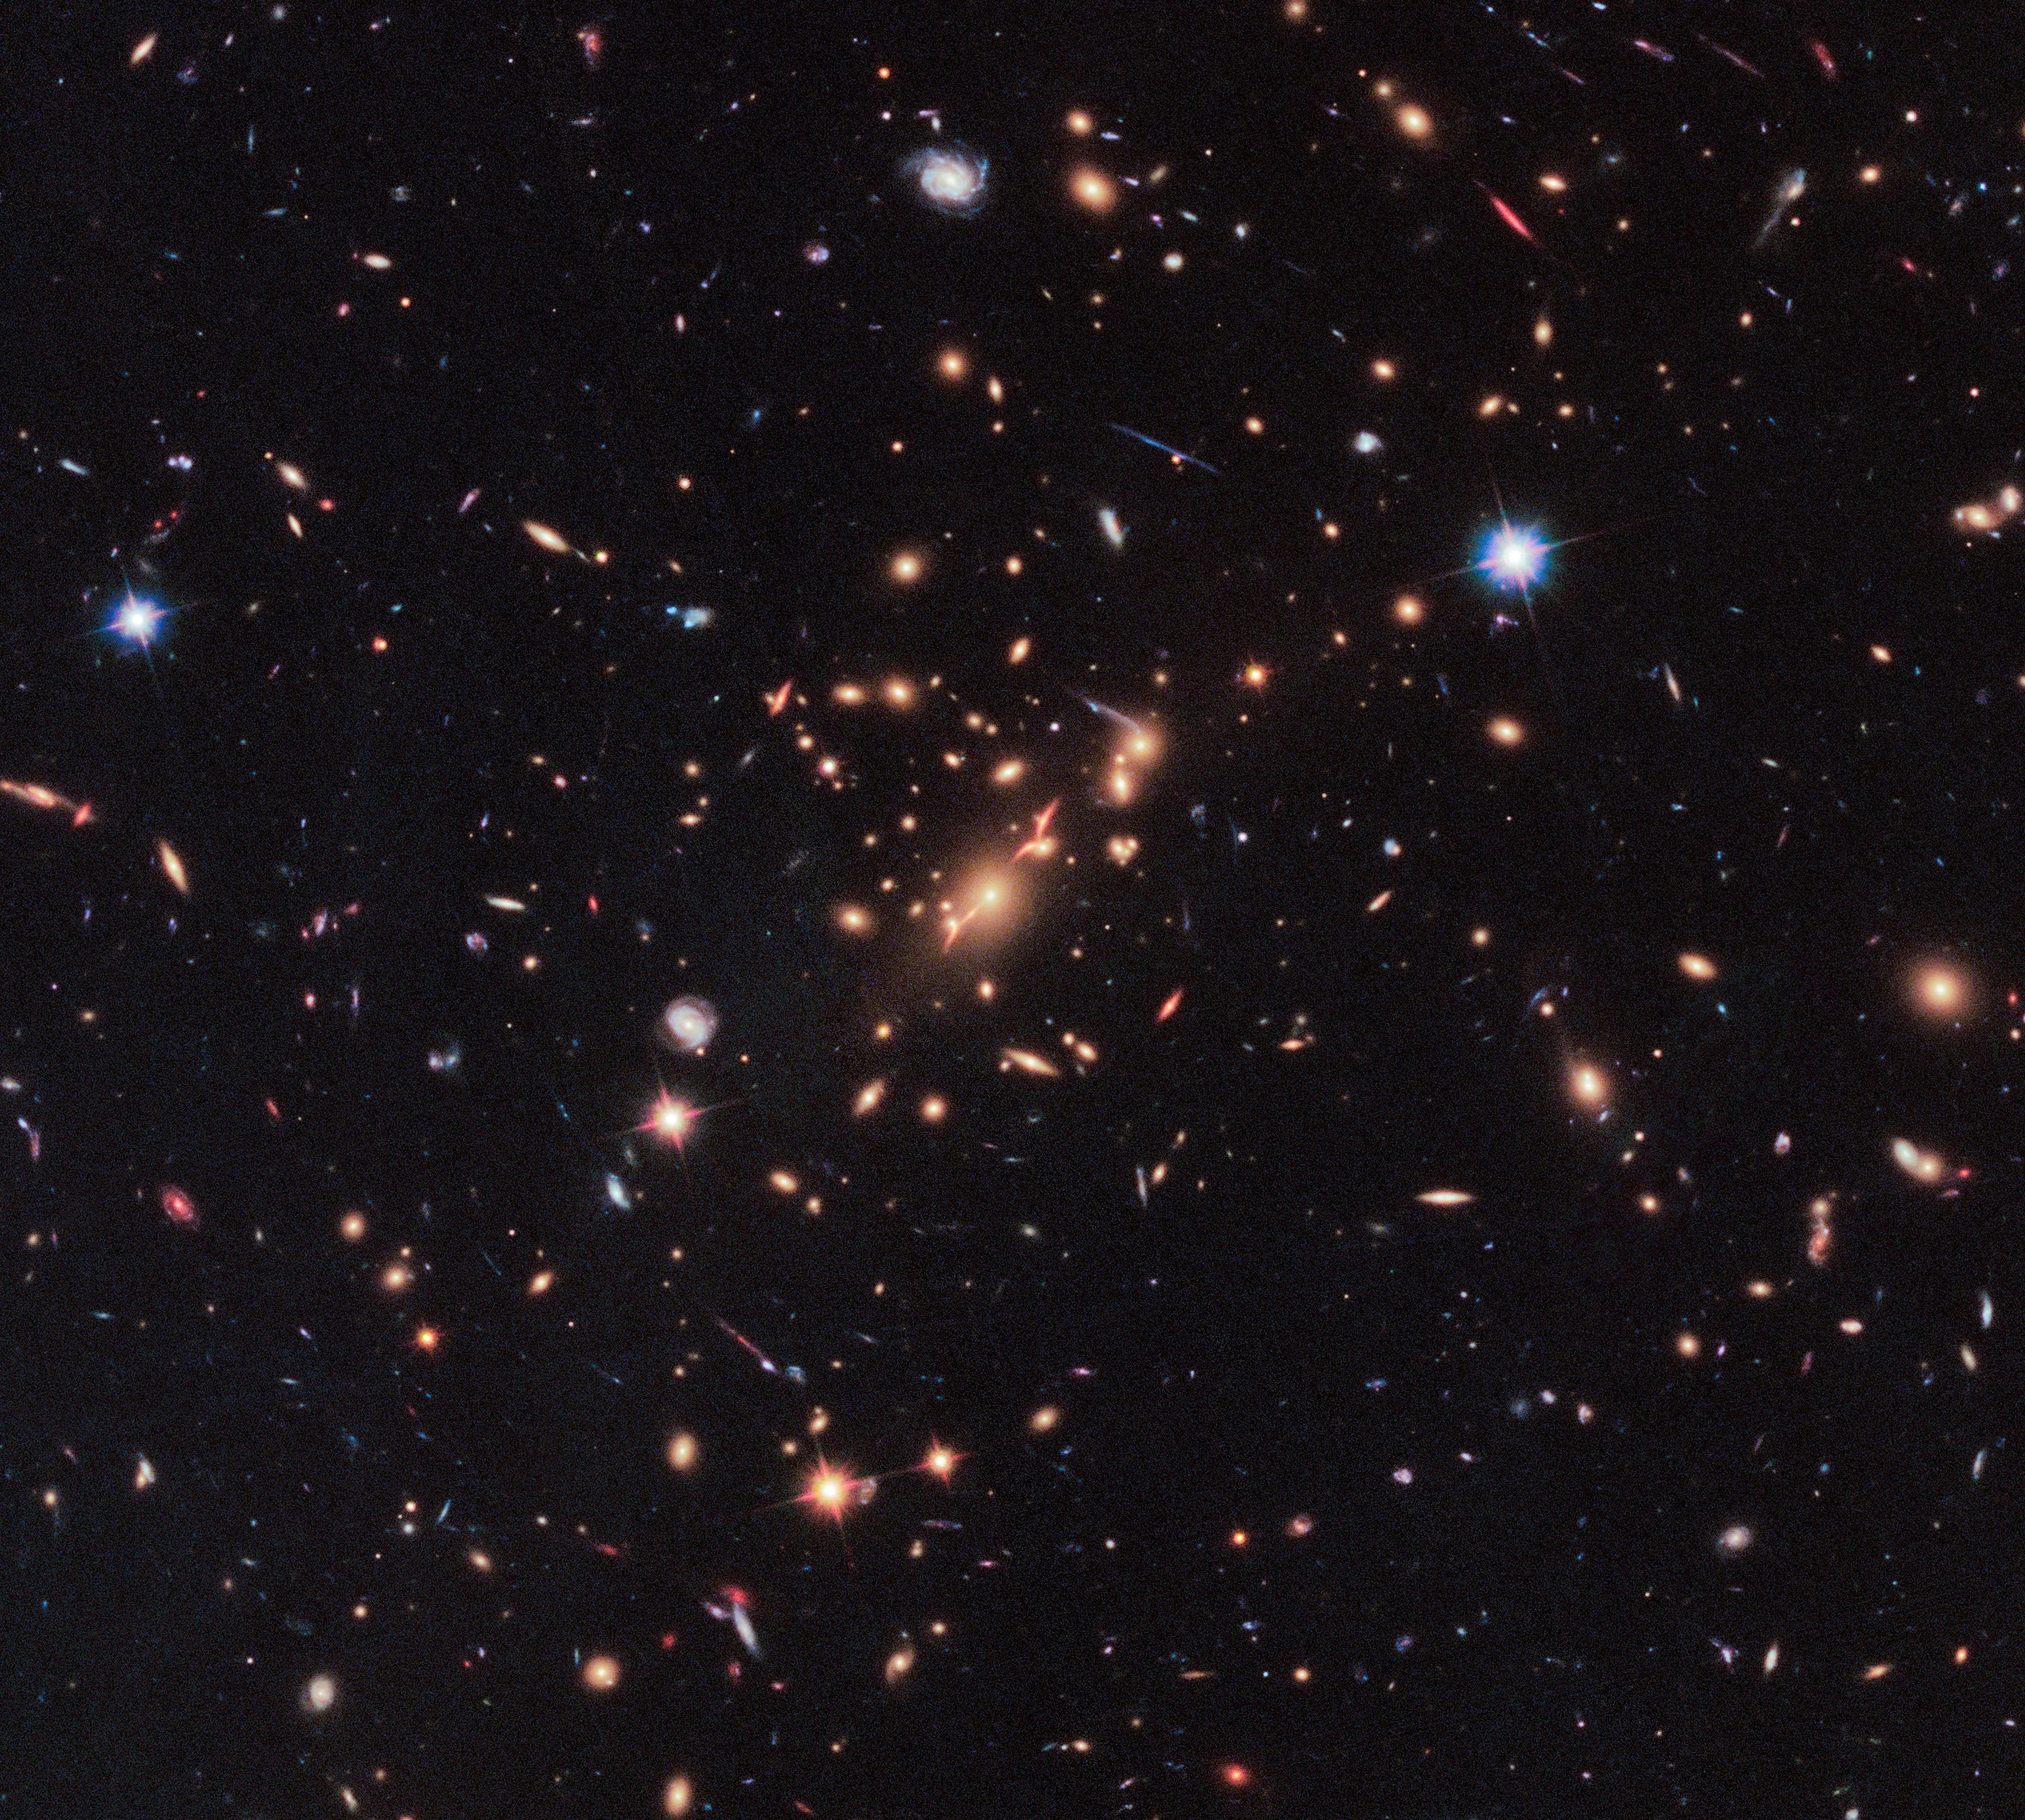 Wide view of galaxy cluster from hubble space telescope